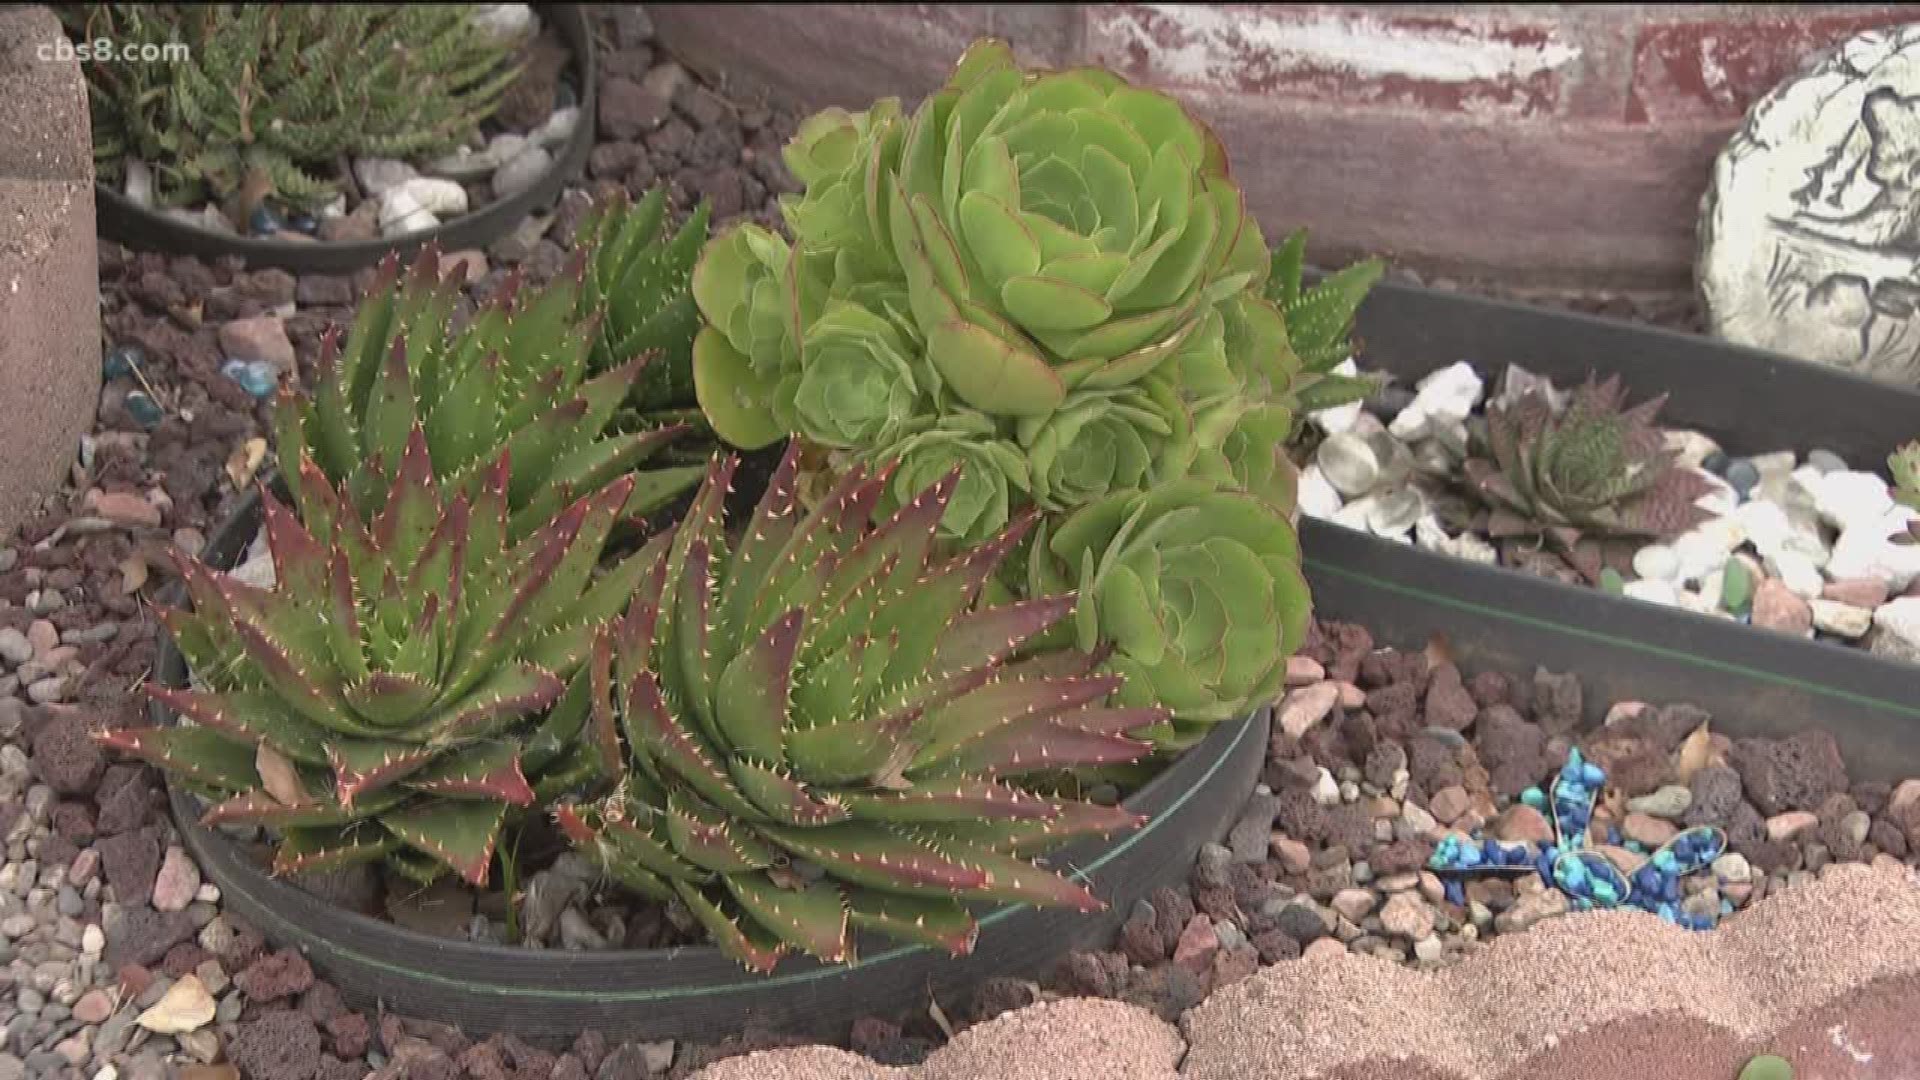 Imagine growing a garden only to give away the vegetables, succulents, and fruits of your labor. In Friday's Zevely Zone, Jeff was invited to visit a special garden in Allied Gardens.